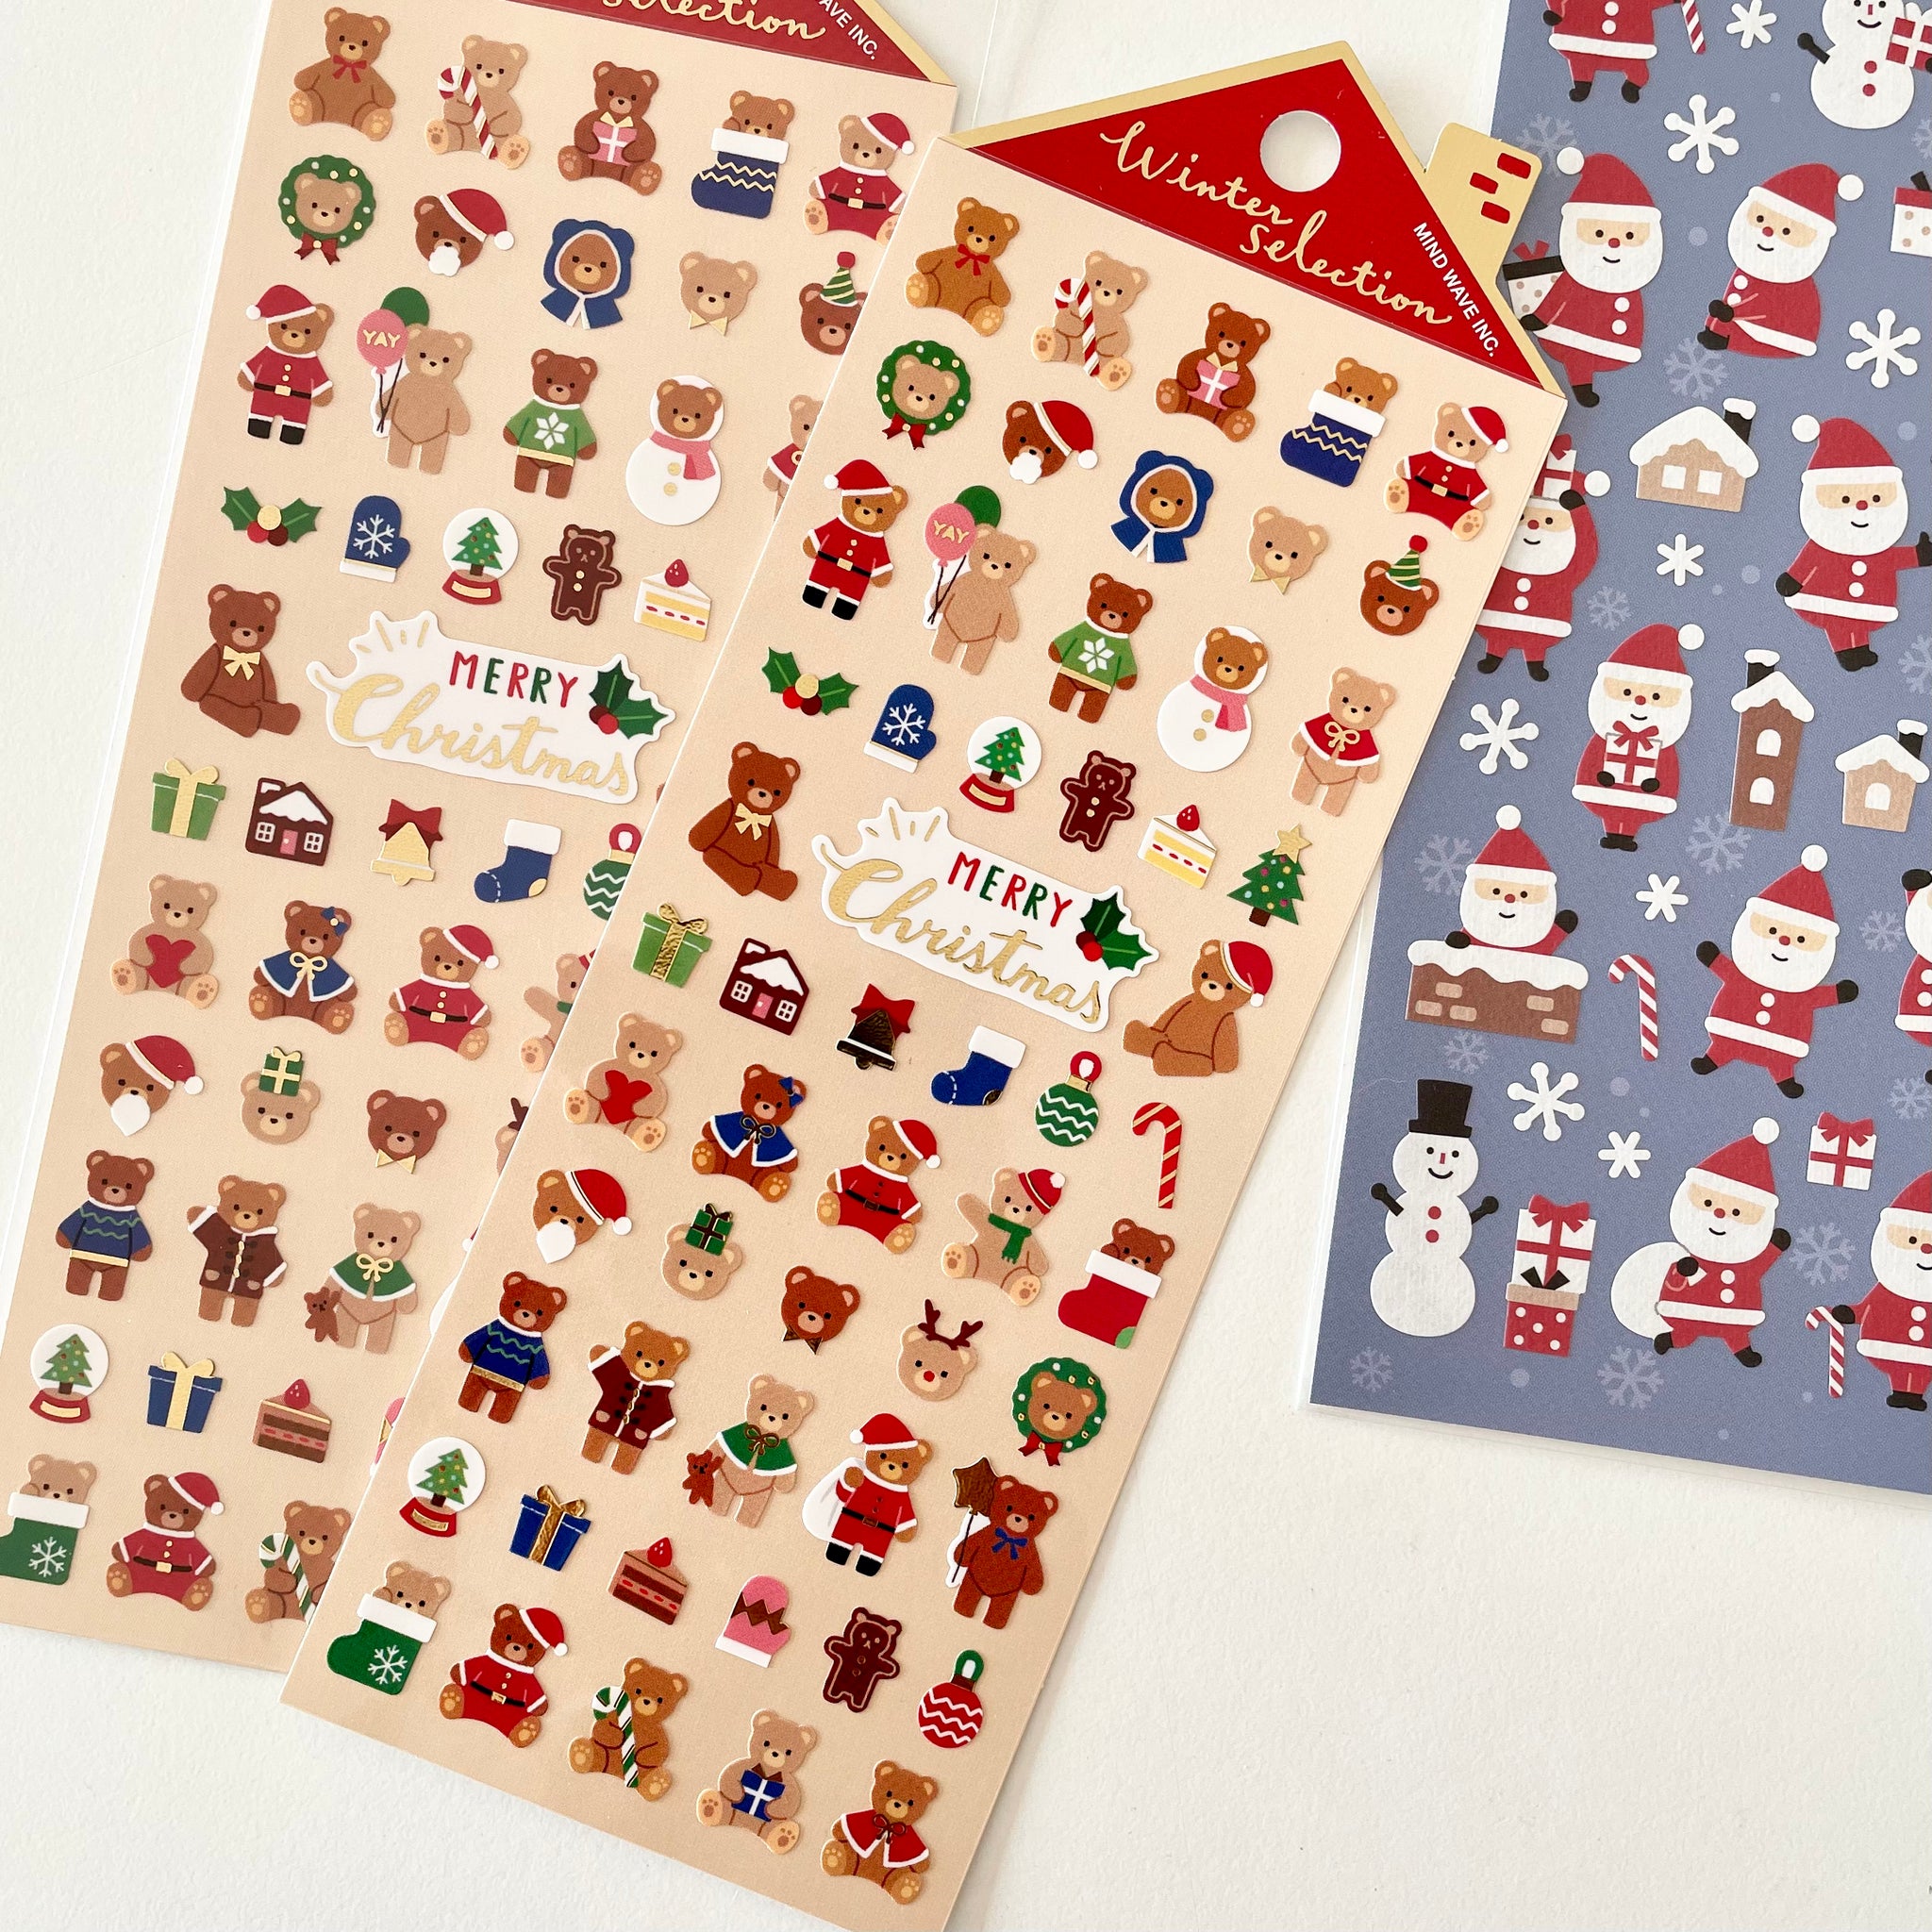 Winter Selection Stickers / Christmas Teddy